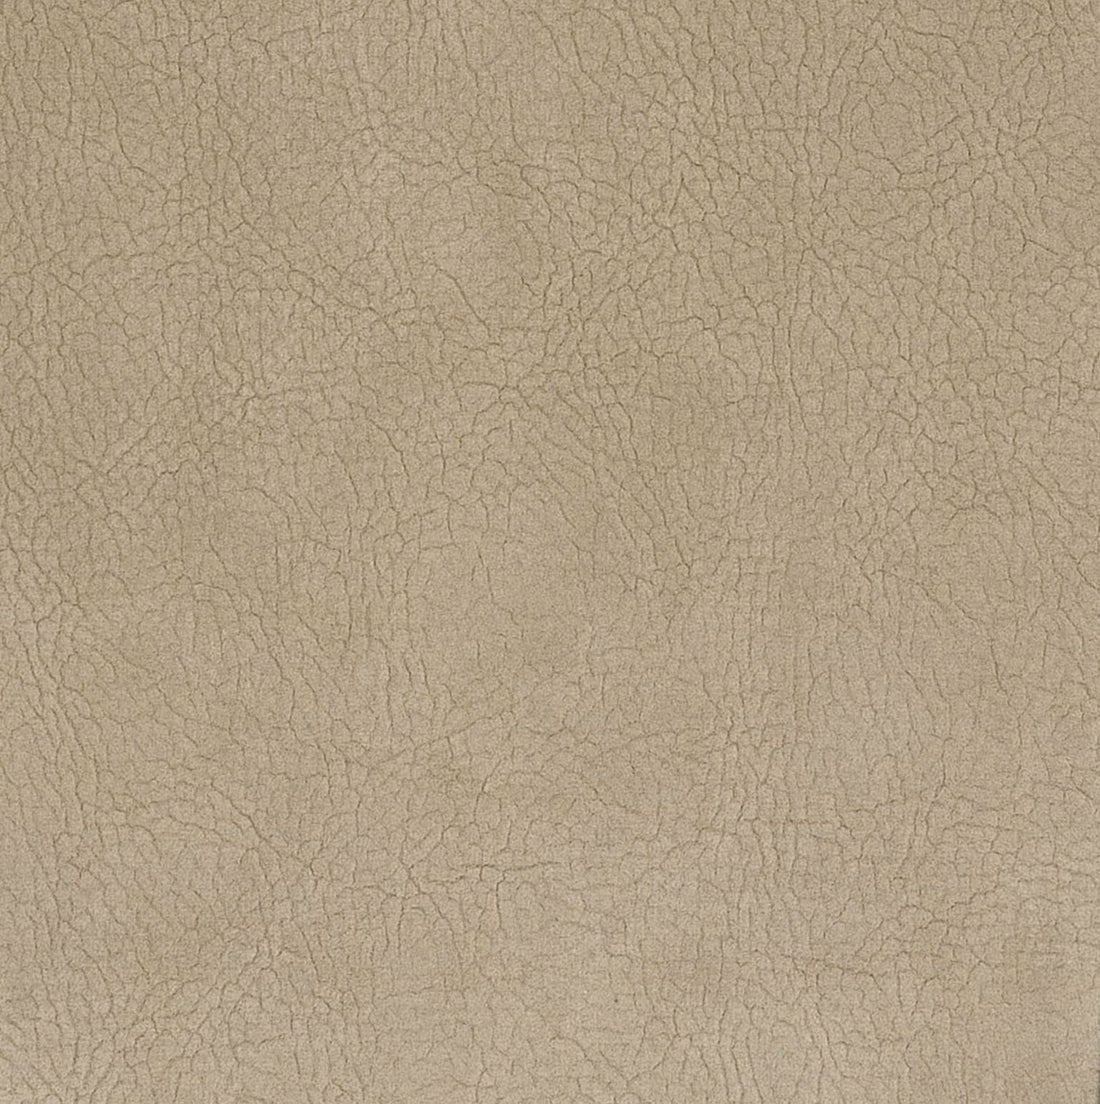 Georgia Suede fabric in nubuck color - pattern number H6 37455937 - by Scalamandre in the Old World Weavers collection